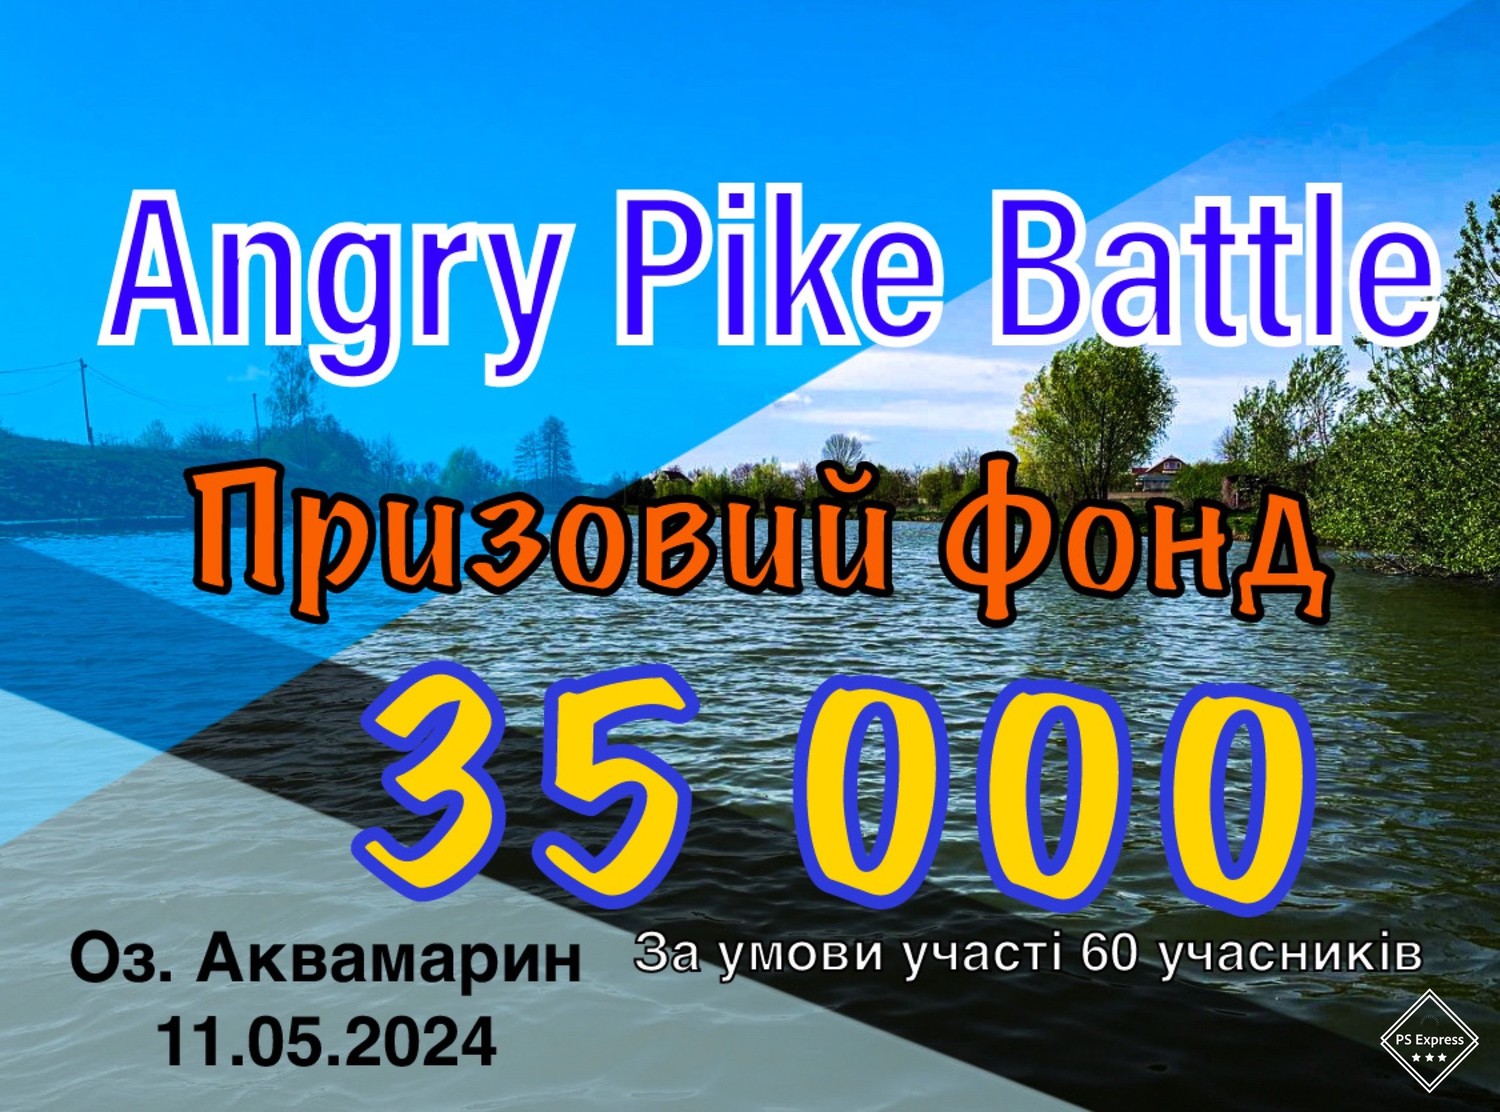 Fish Sport - Angry Pike Battle